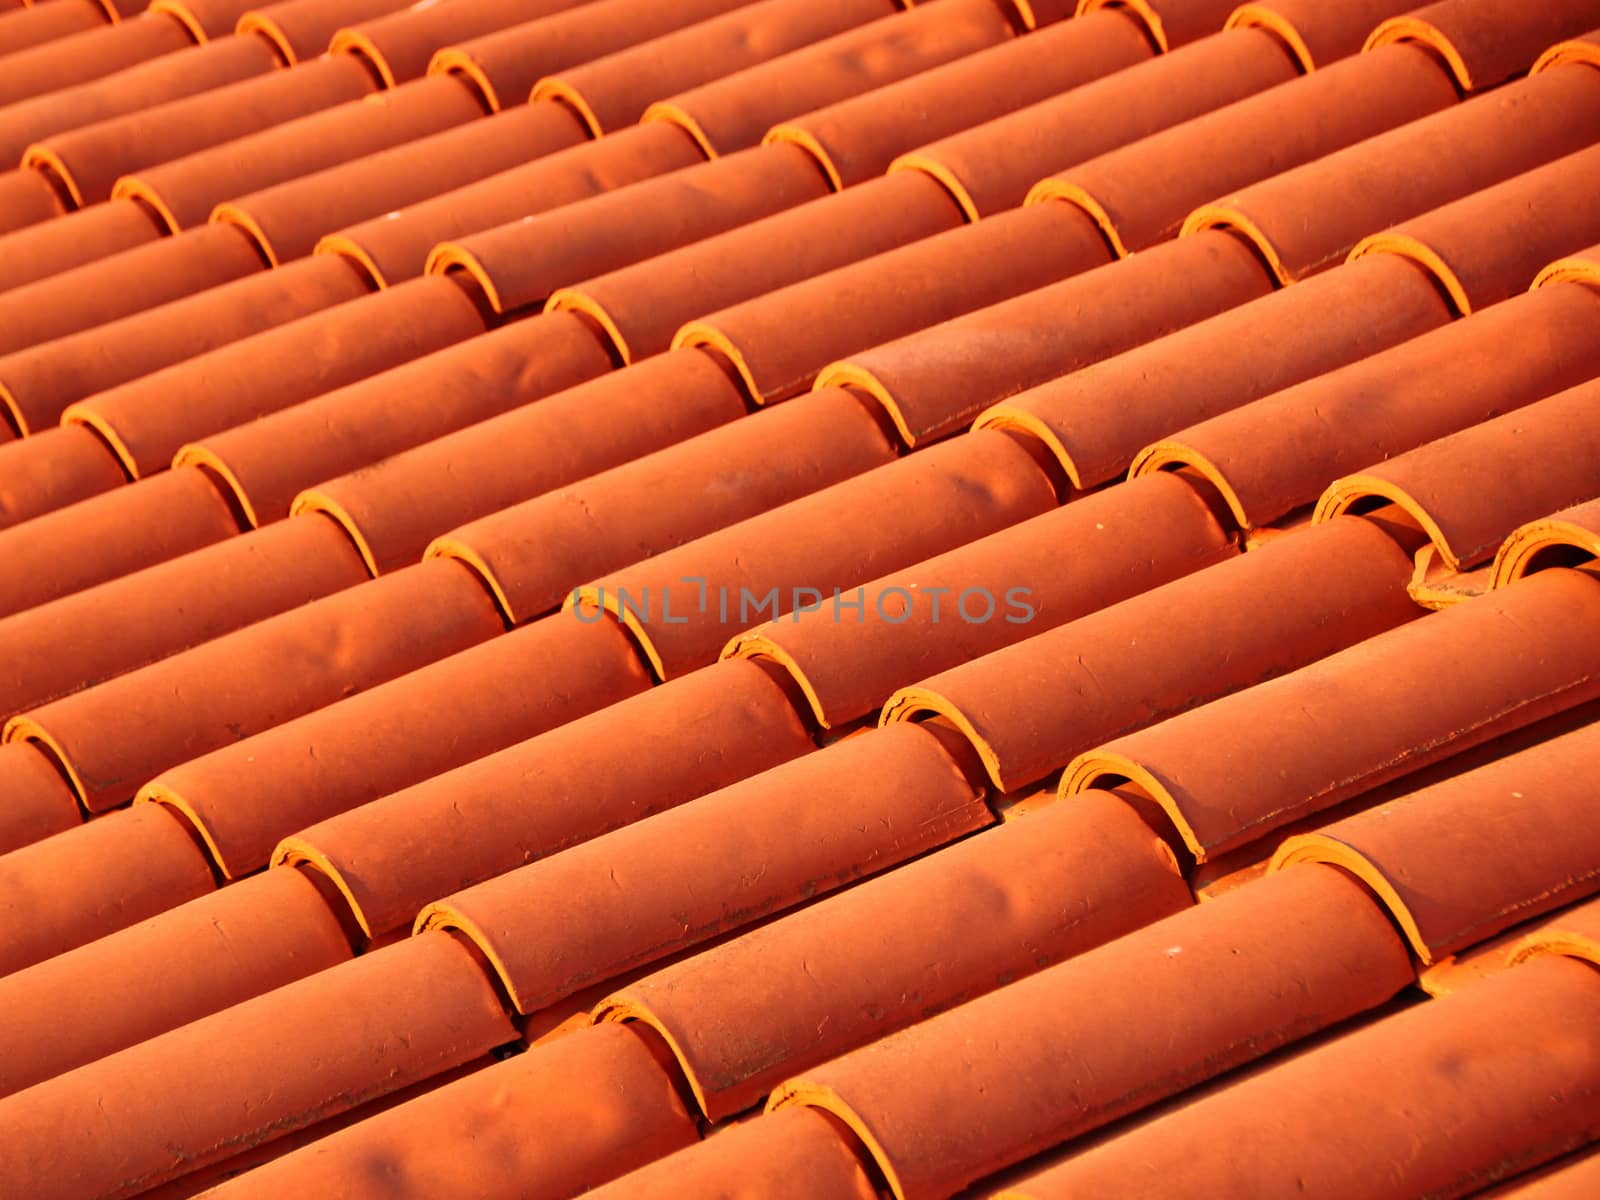 New Shingle Tile Brick Roof in Red Colors